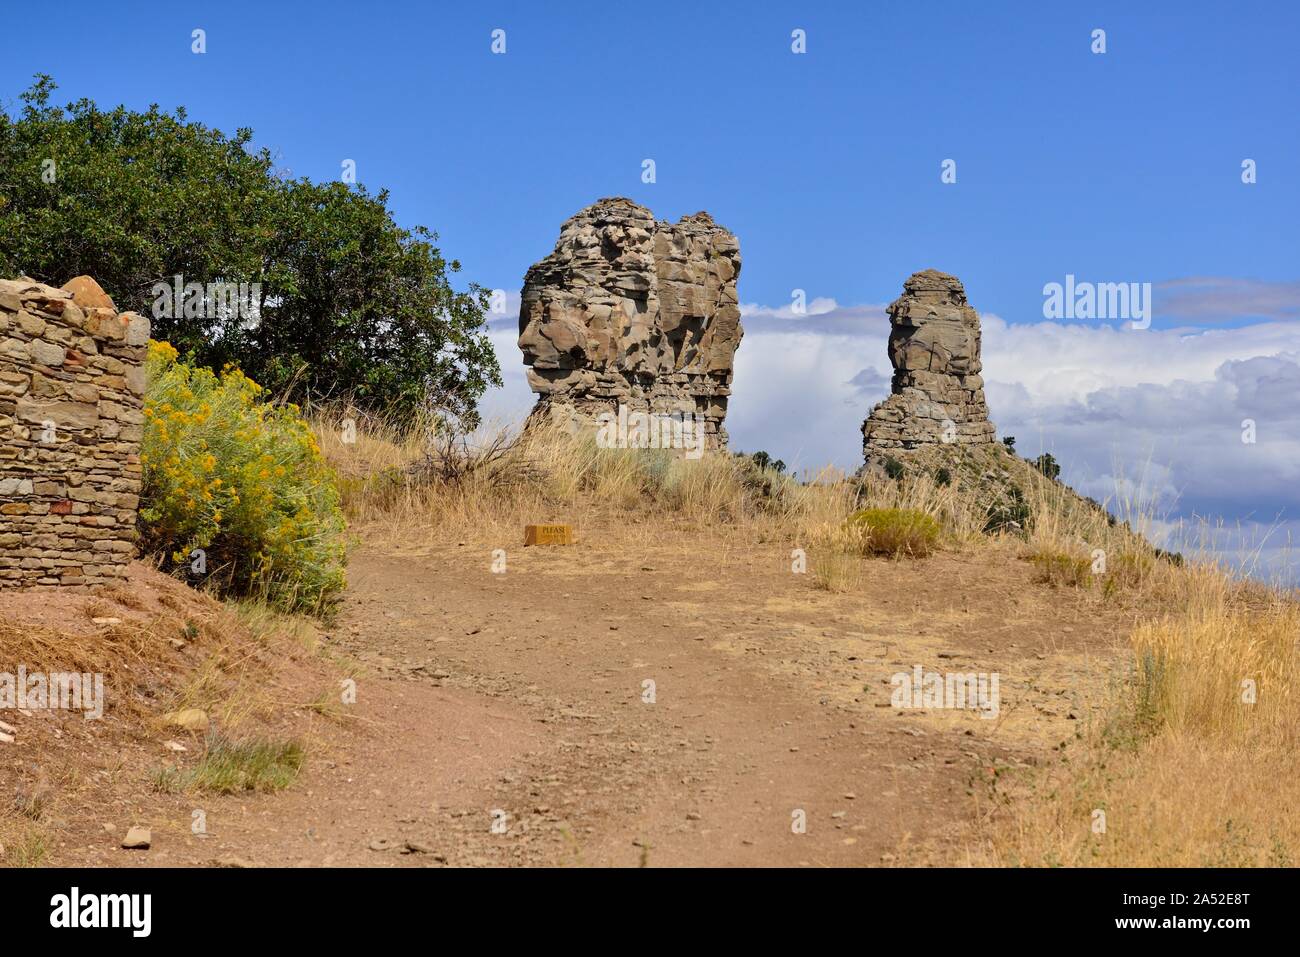 Chimney Rock and Companion Rock, Chacoan room block wall, Chimney Rock National Monument, CO 190911 61299 Stock Photo